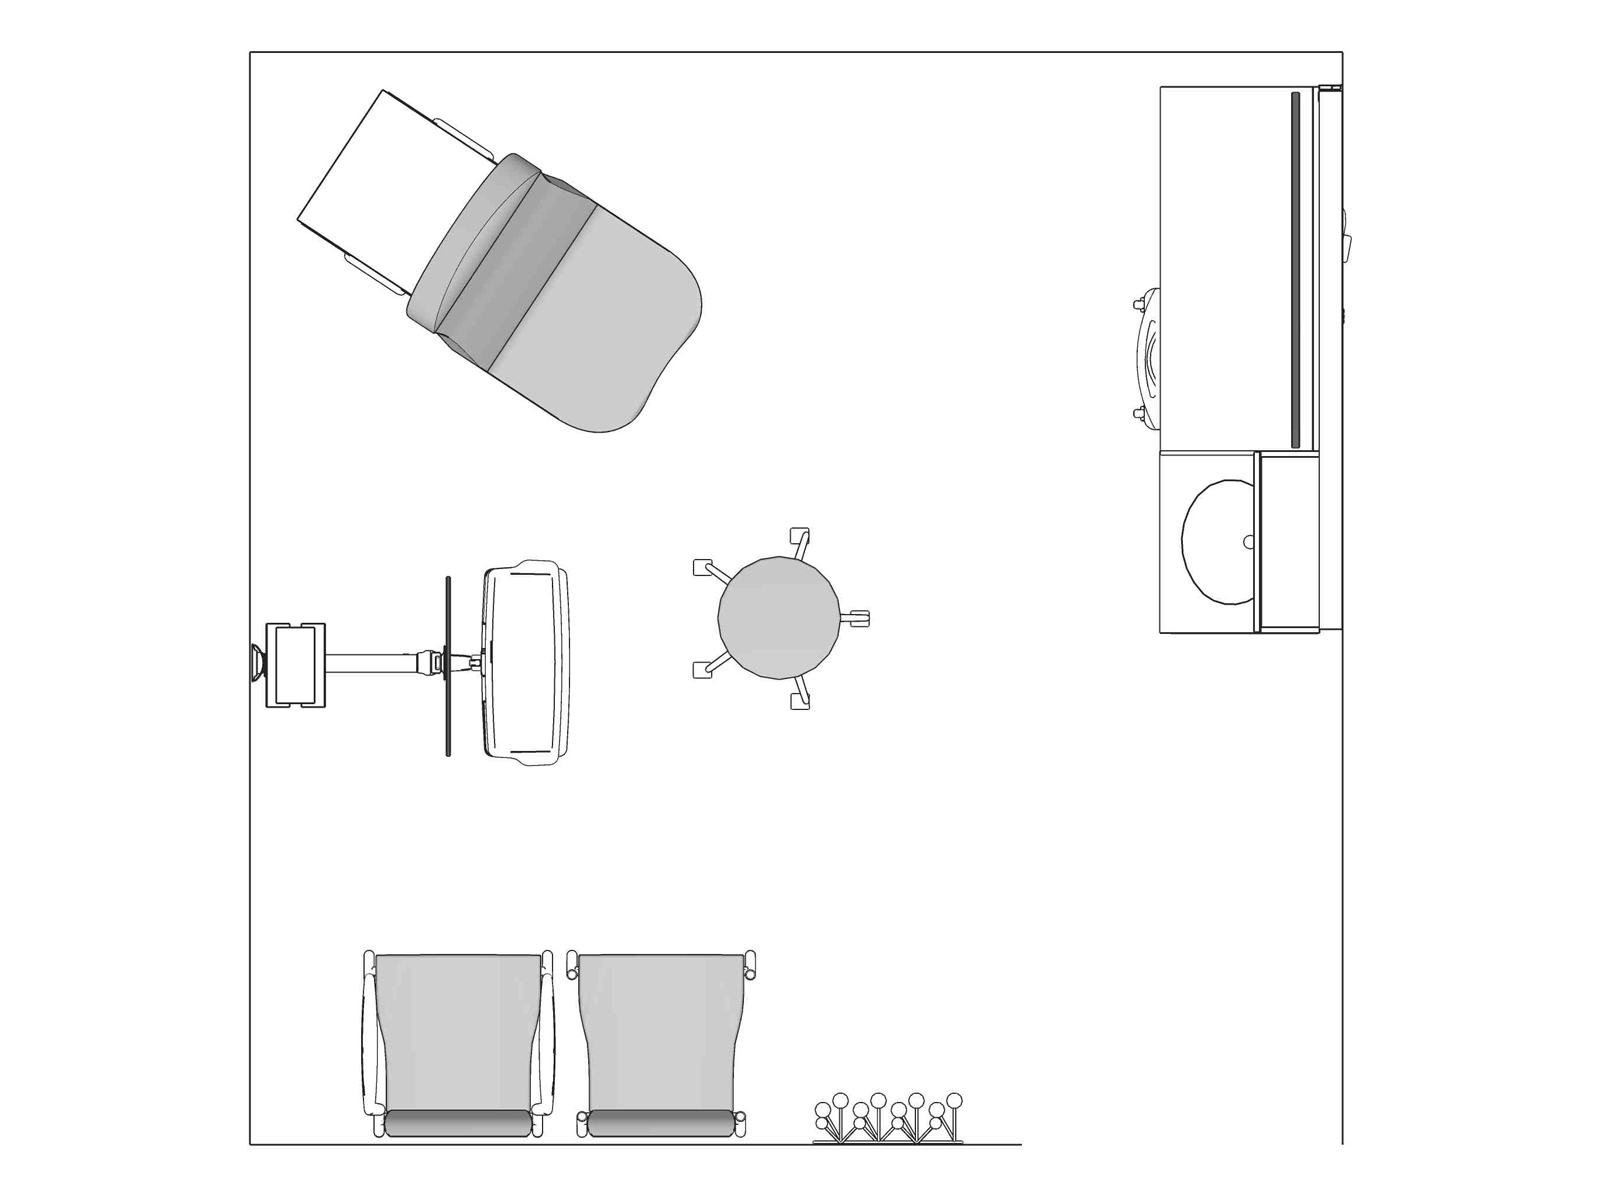 A line drawing viewed from above - Exam Room 011